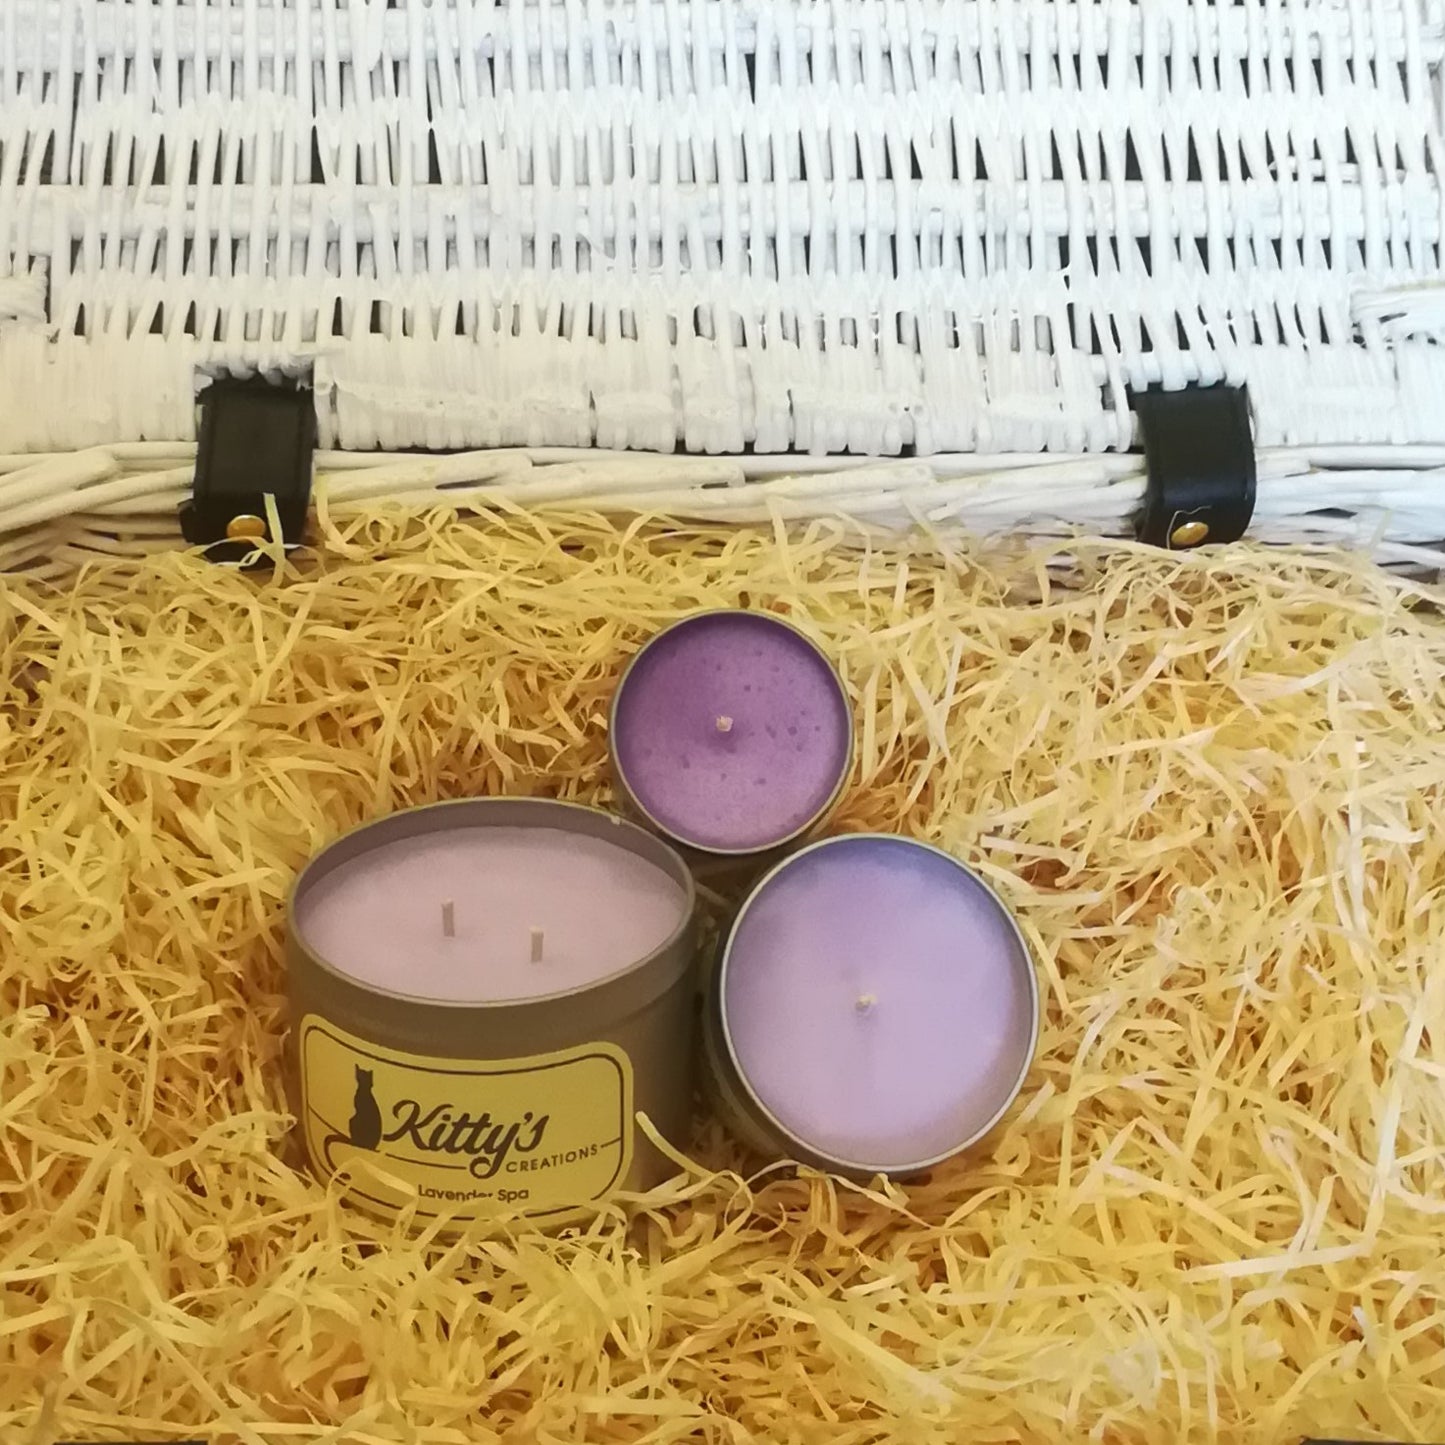 Three light purple, hand poured candles filled with lavender fragranced soy wax, contained in travel tins with clear see through lids ready for you to take on your next adventure whether for work or pleasure. 